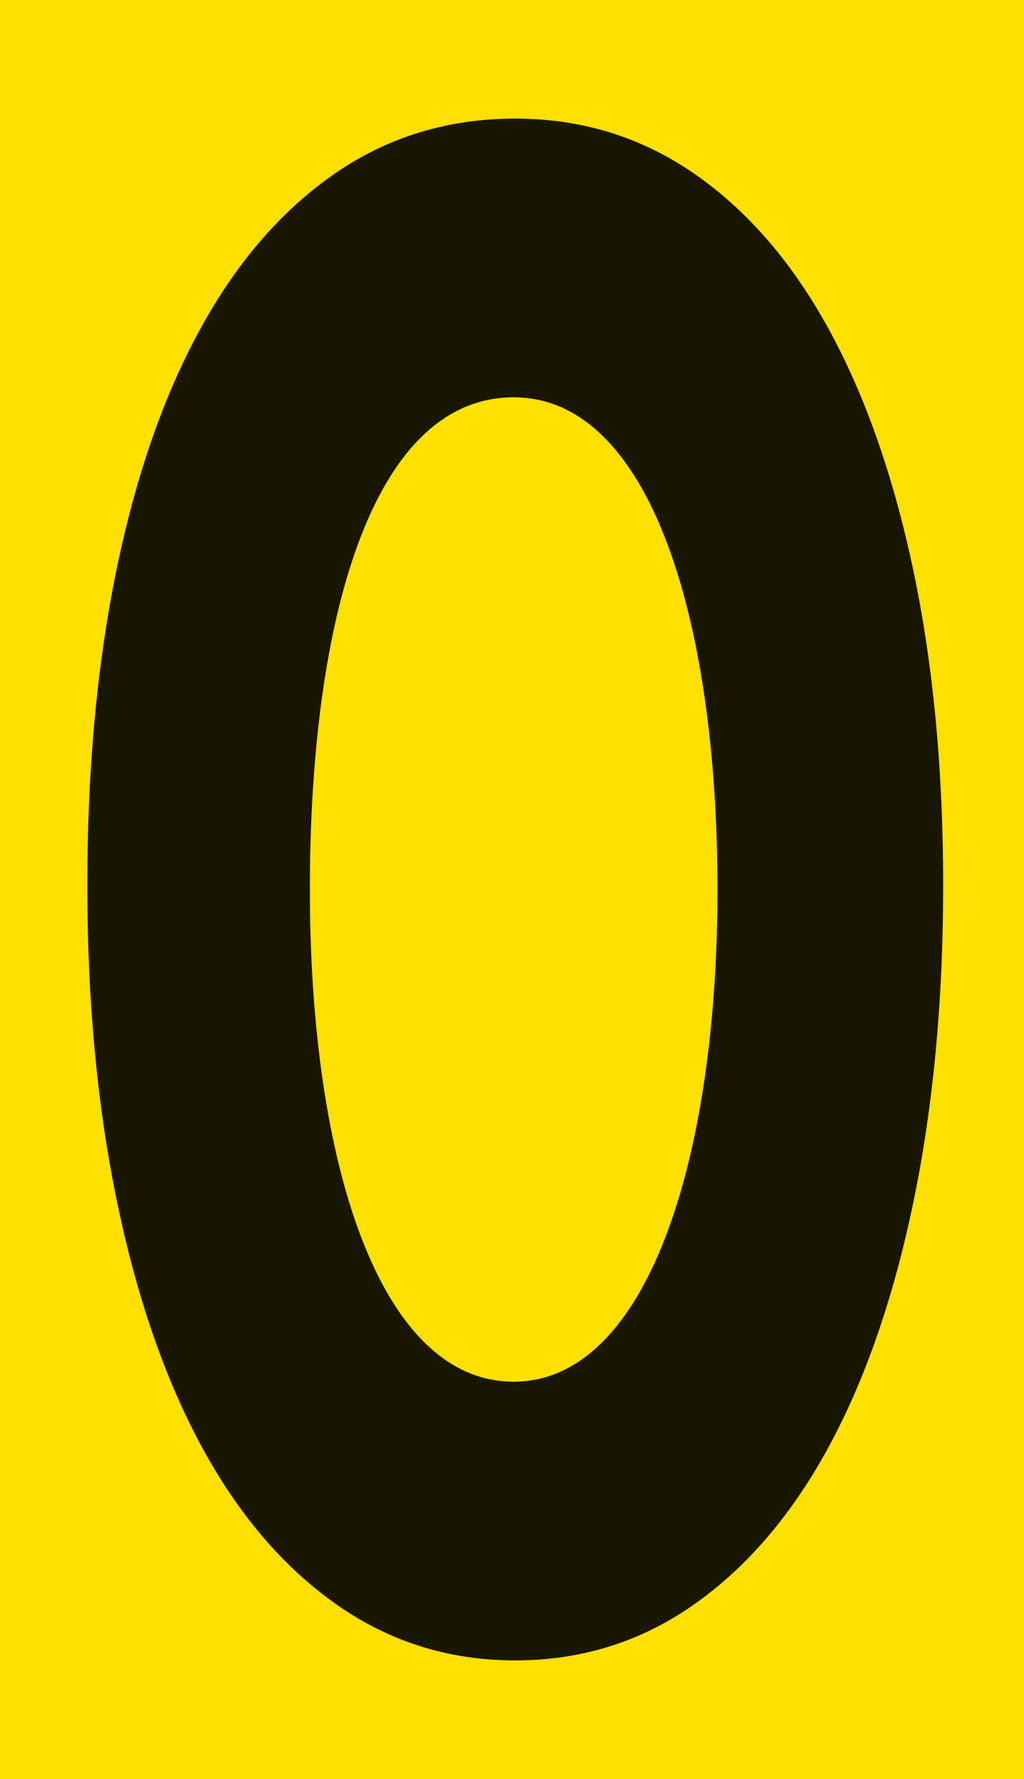 Mighty Line YELLOW Die Cut Location Markers - Letter O - Pack of 10